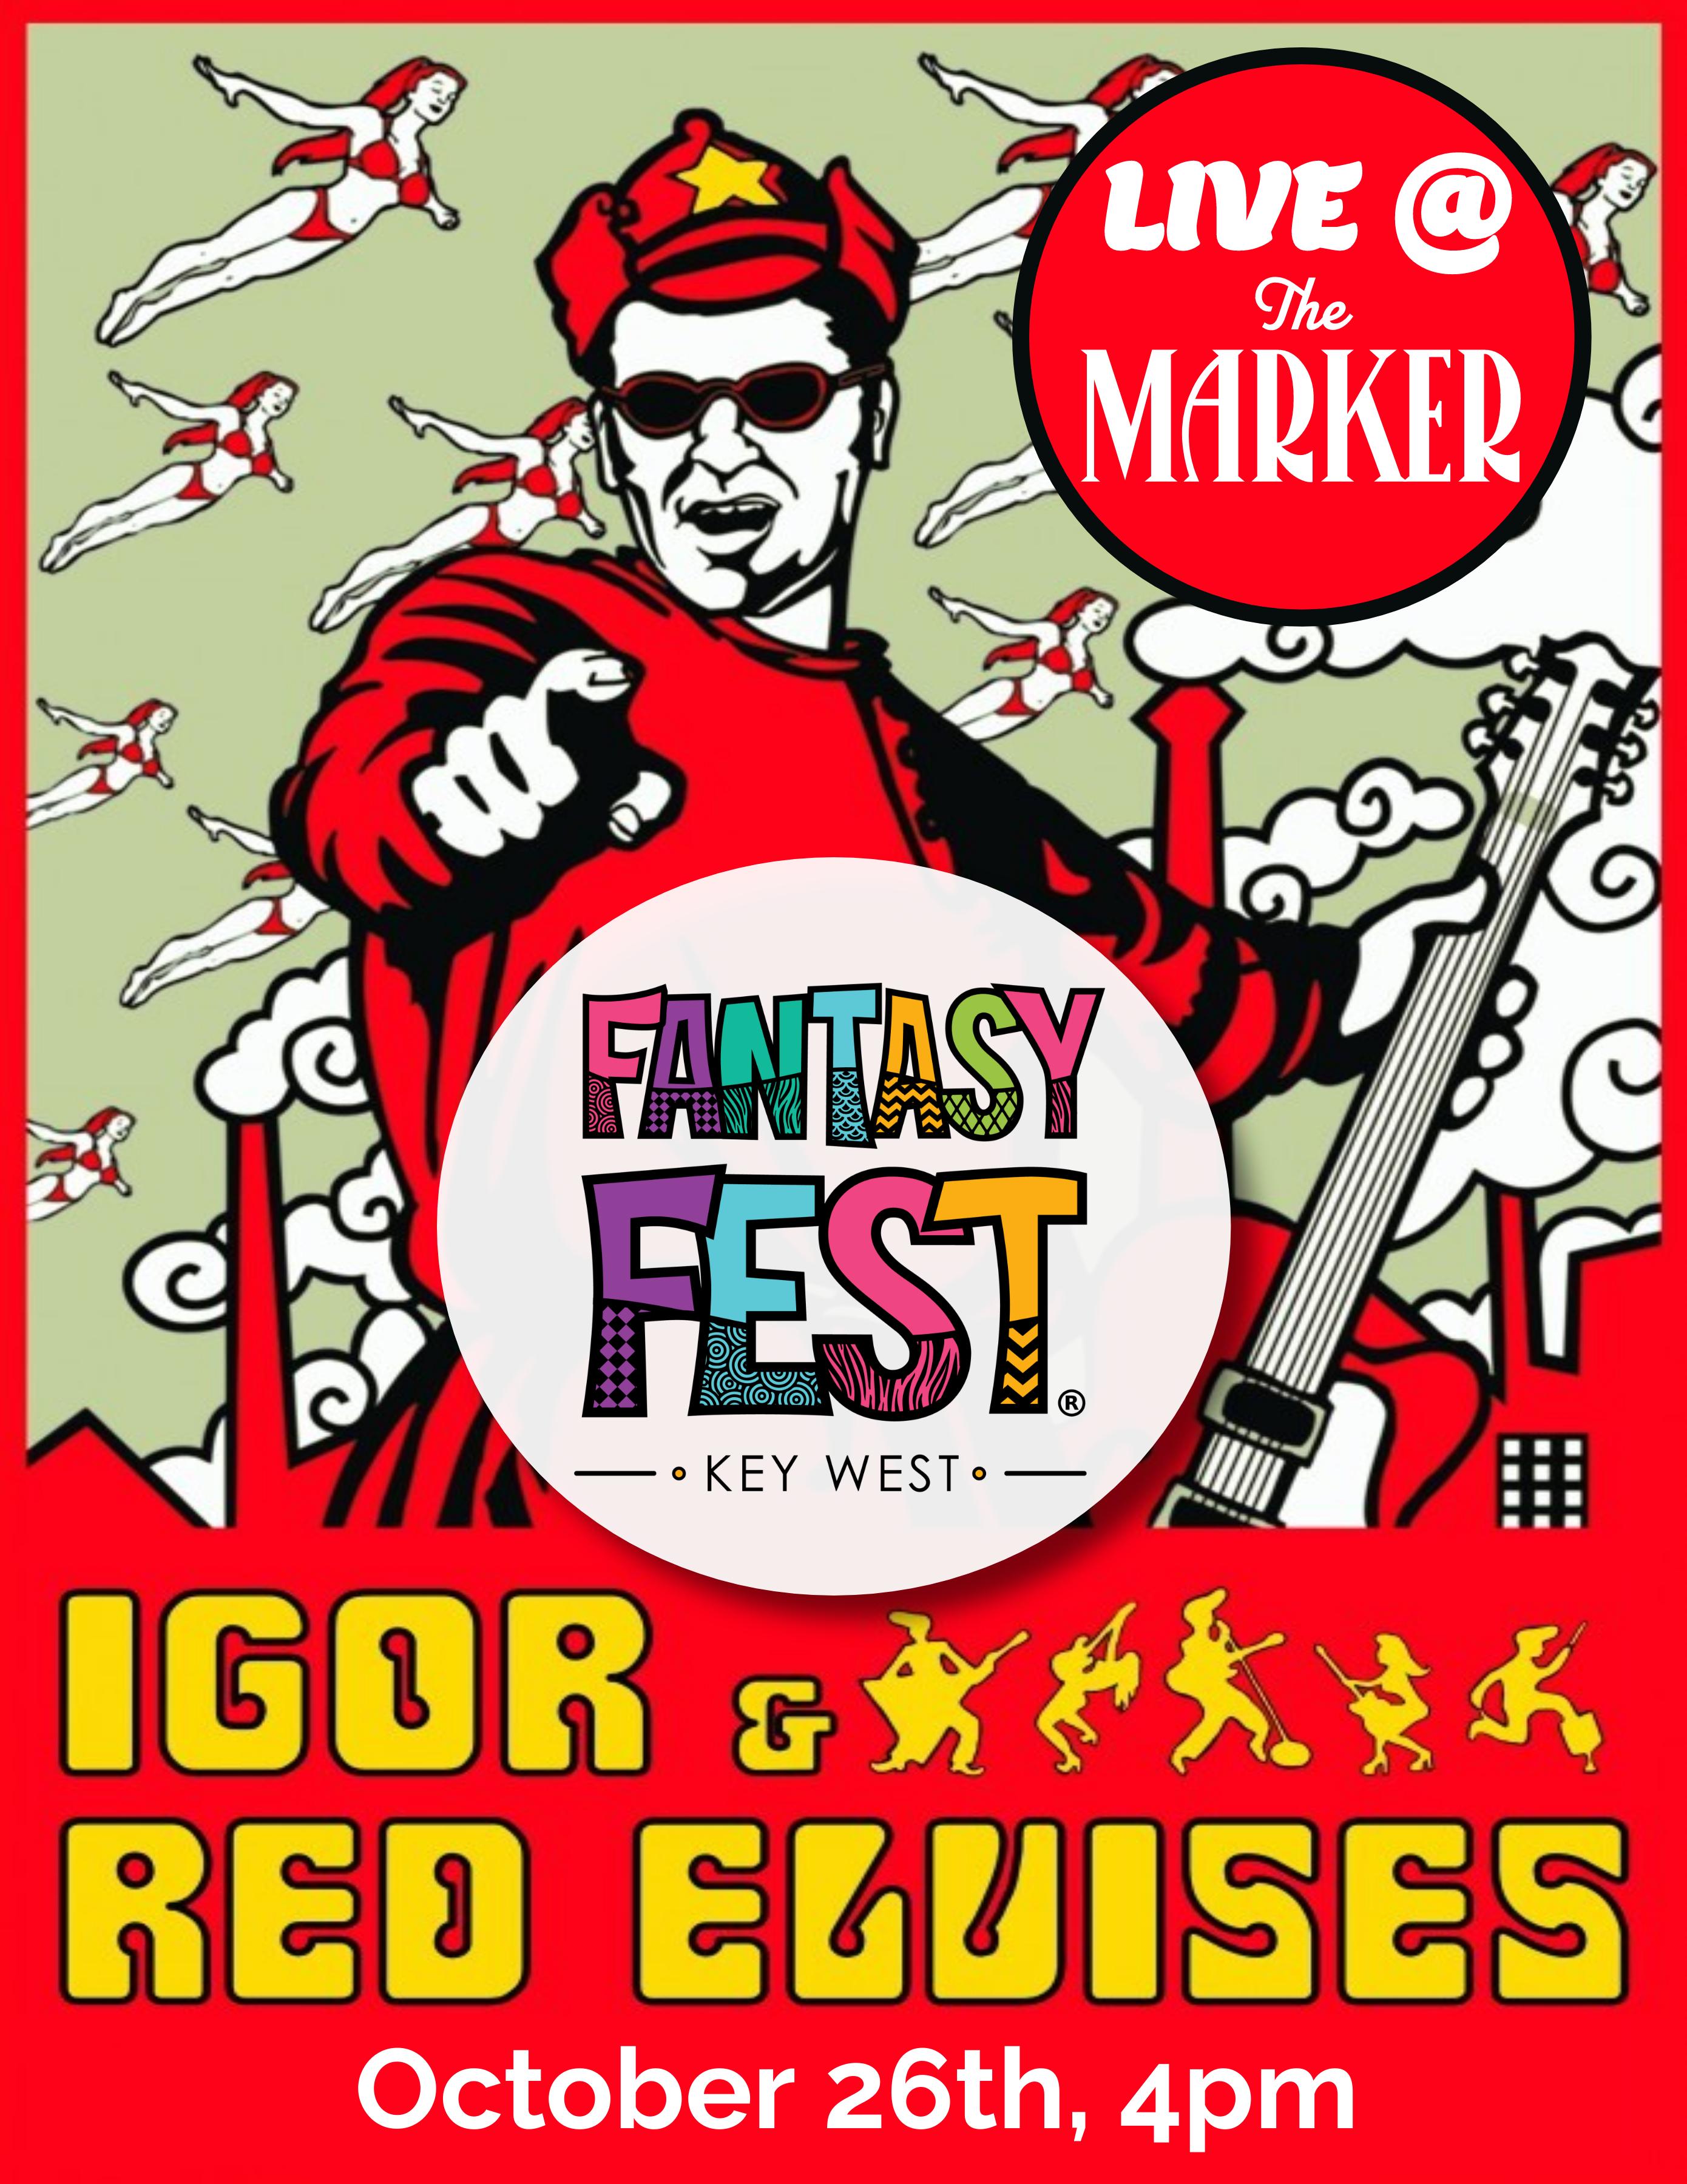 RED ELVISES Concert & Pool Party at The Marker Key West